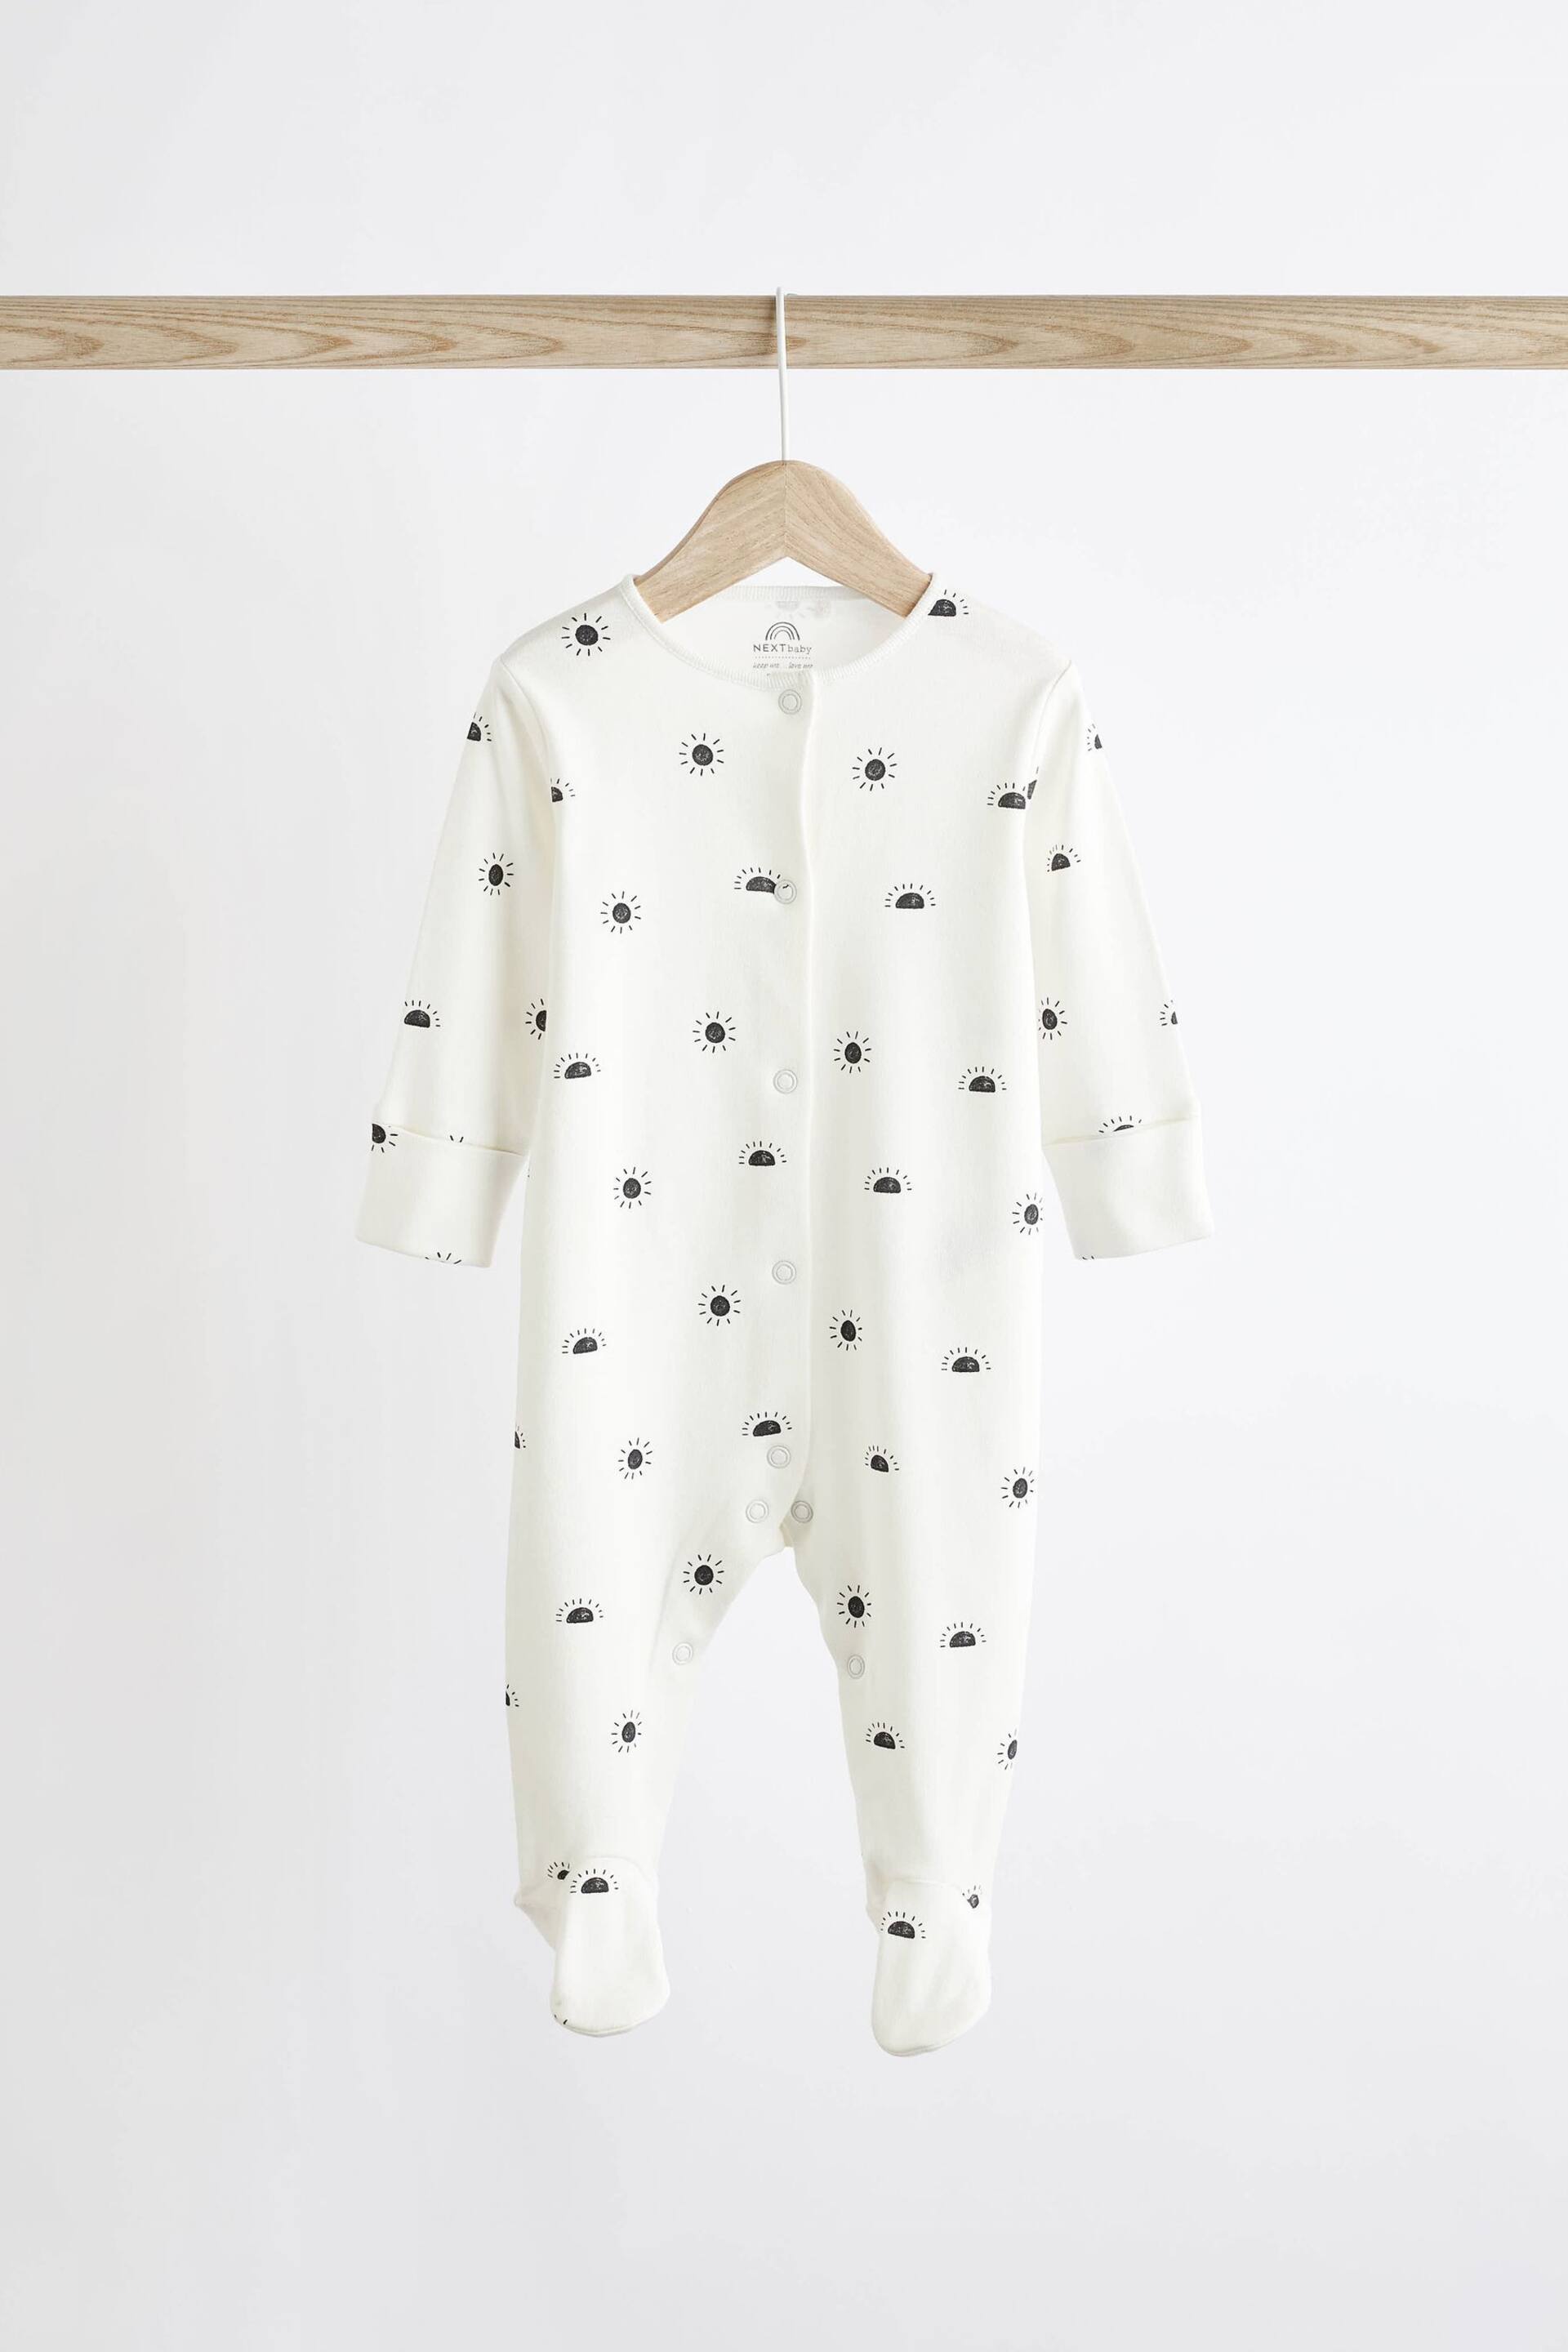 Monochrome 4 Pack Baby Printed Long Sleeve Sleepsuits (0-2yrs) - Image 7 of 13